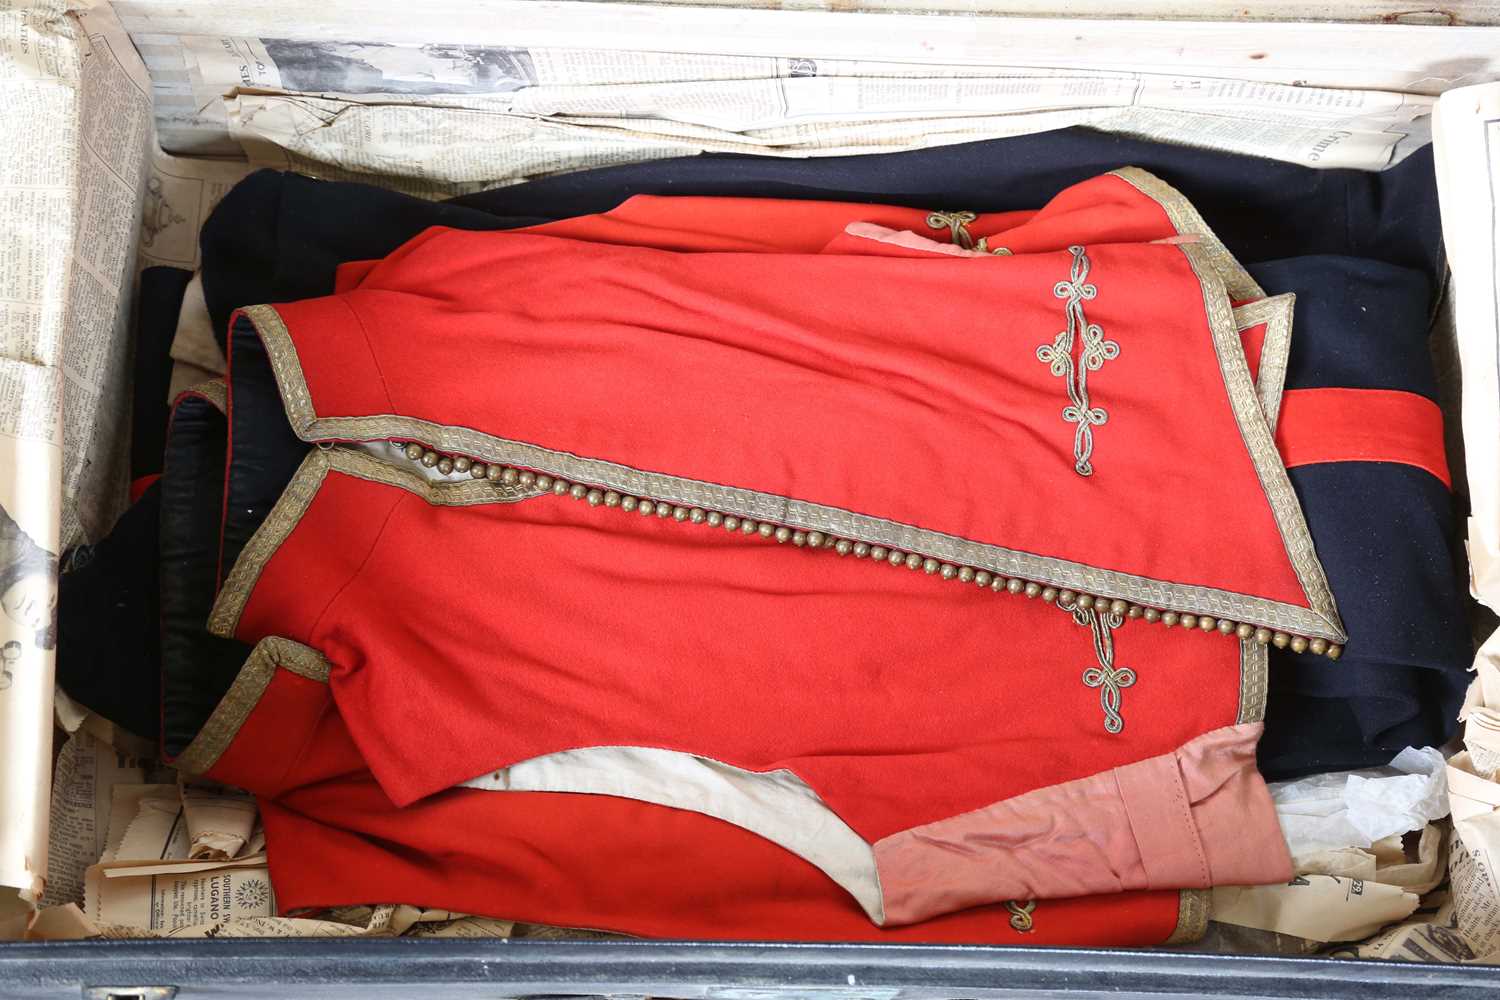 A late Victorian Royal Artillery officer's dress uniform, comprising two jackets, waistcoat, - Image 7 of 8